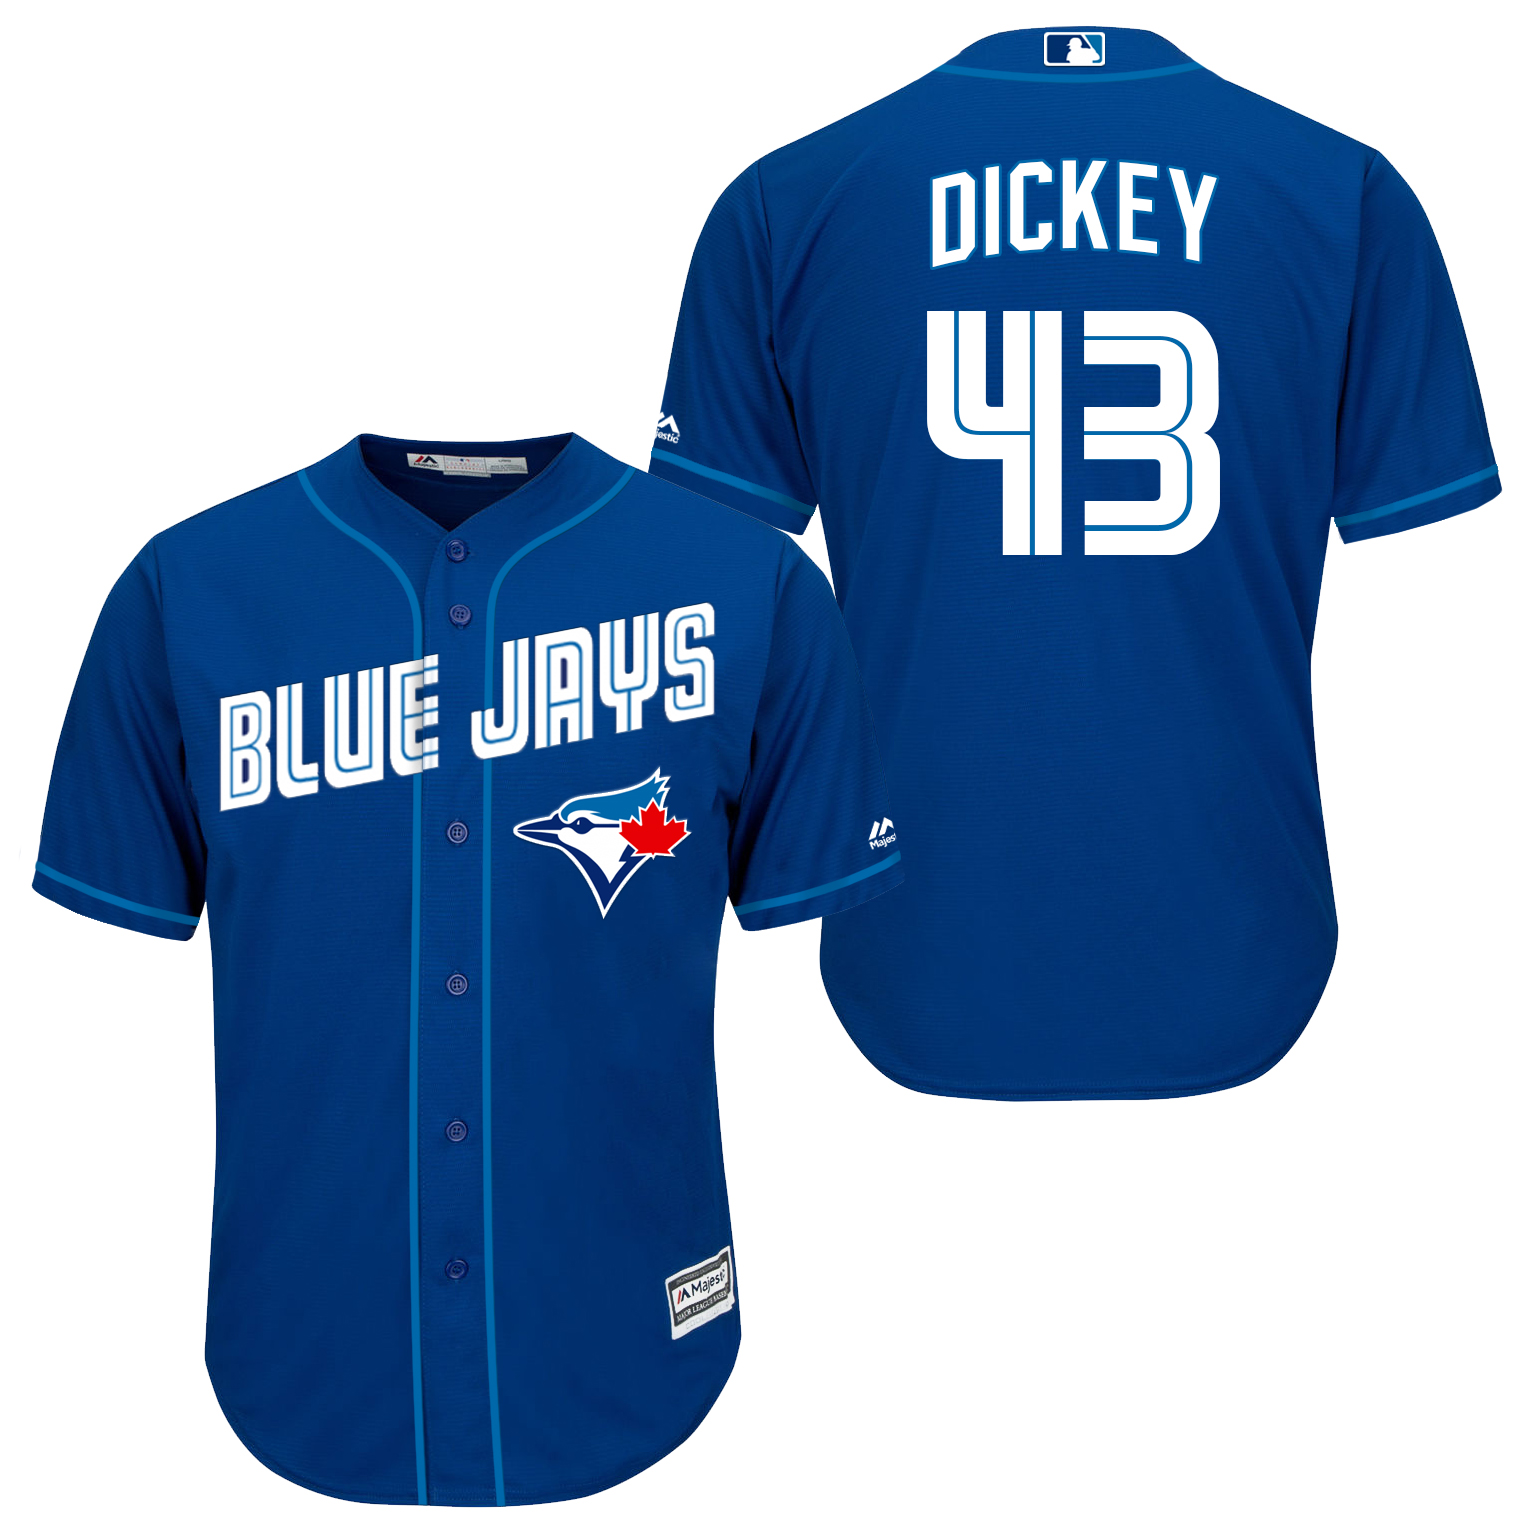 Blue Jays 43 R.A. Dickey Royal Blue New Cool Base Jersey